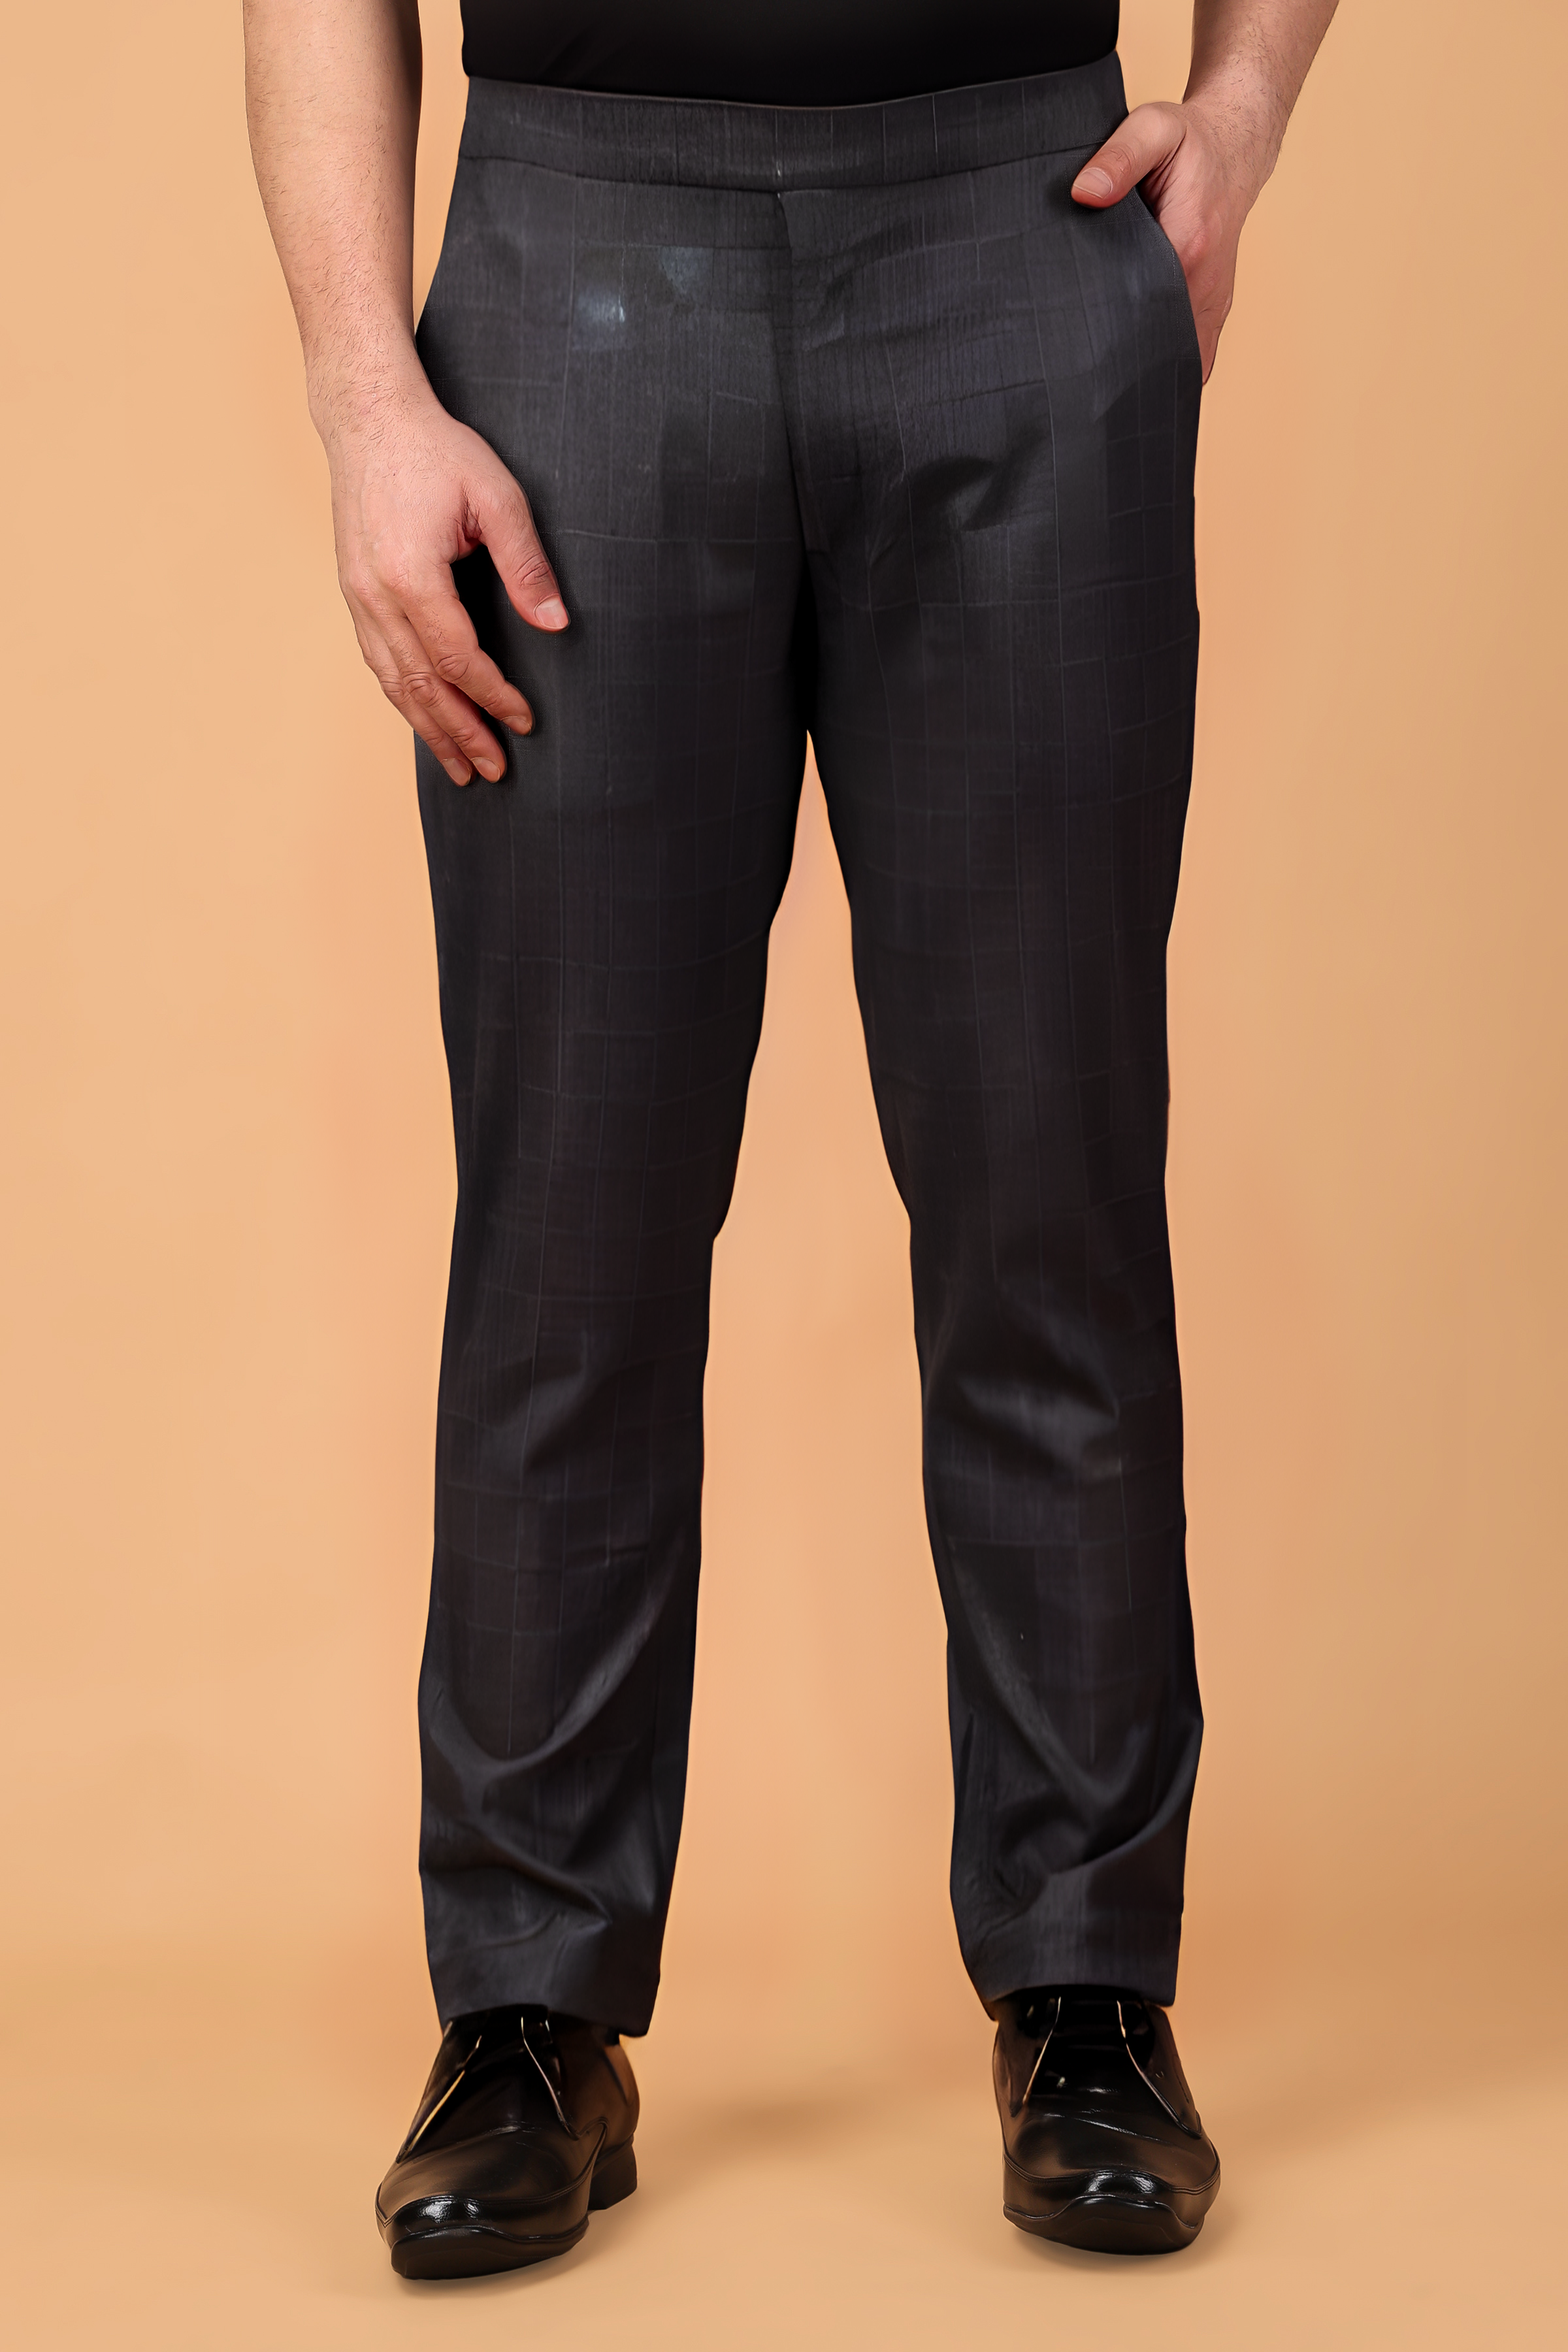 Trouser Talk - The Leg Opening - Simply Refined